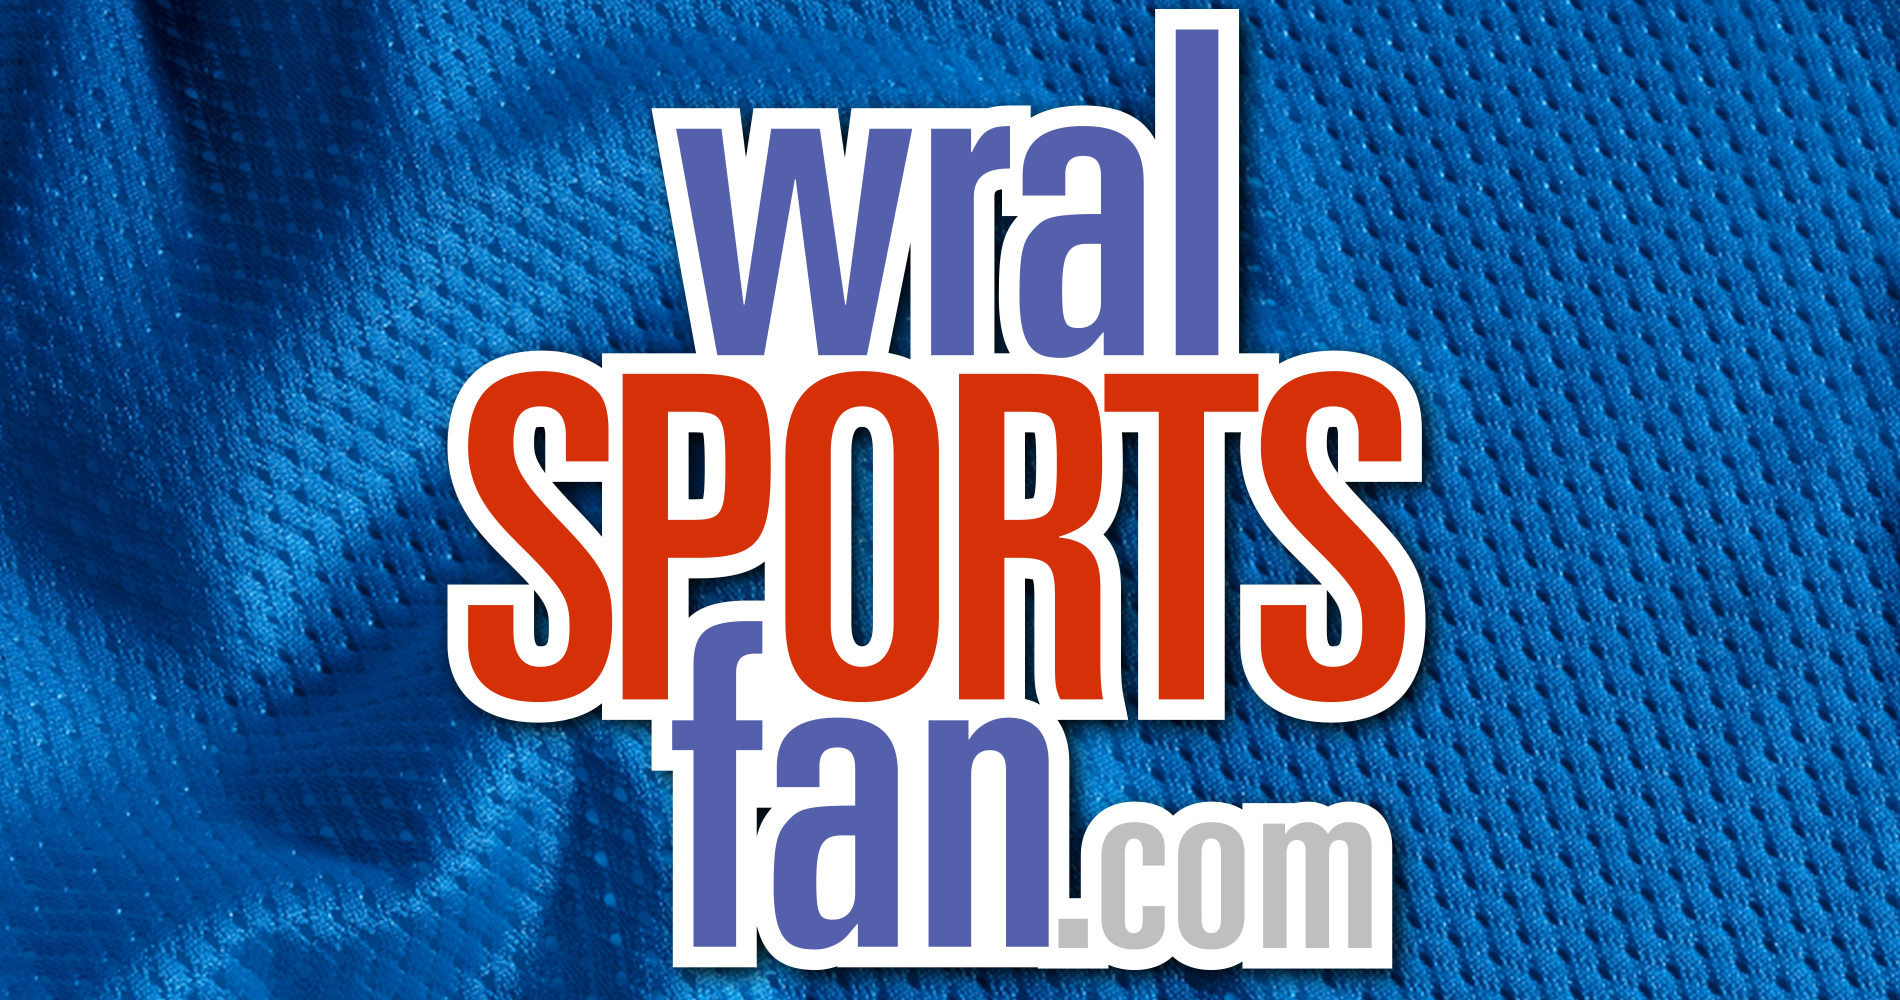 Bryce Young, a rookie quarterback for the Panthers, has been declared free of his ankle injury and is anticipated to play in the game against the Vikings. This information was reported on WRALSportsFan.com.